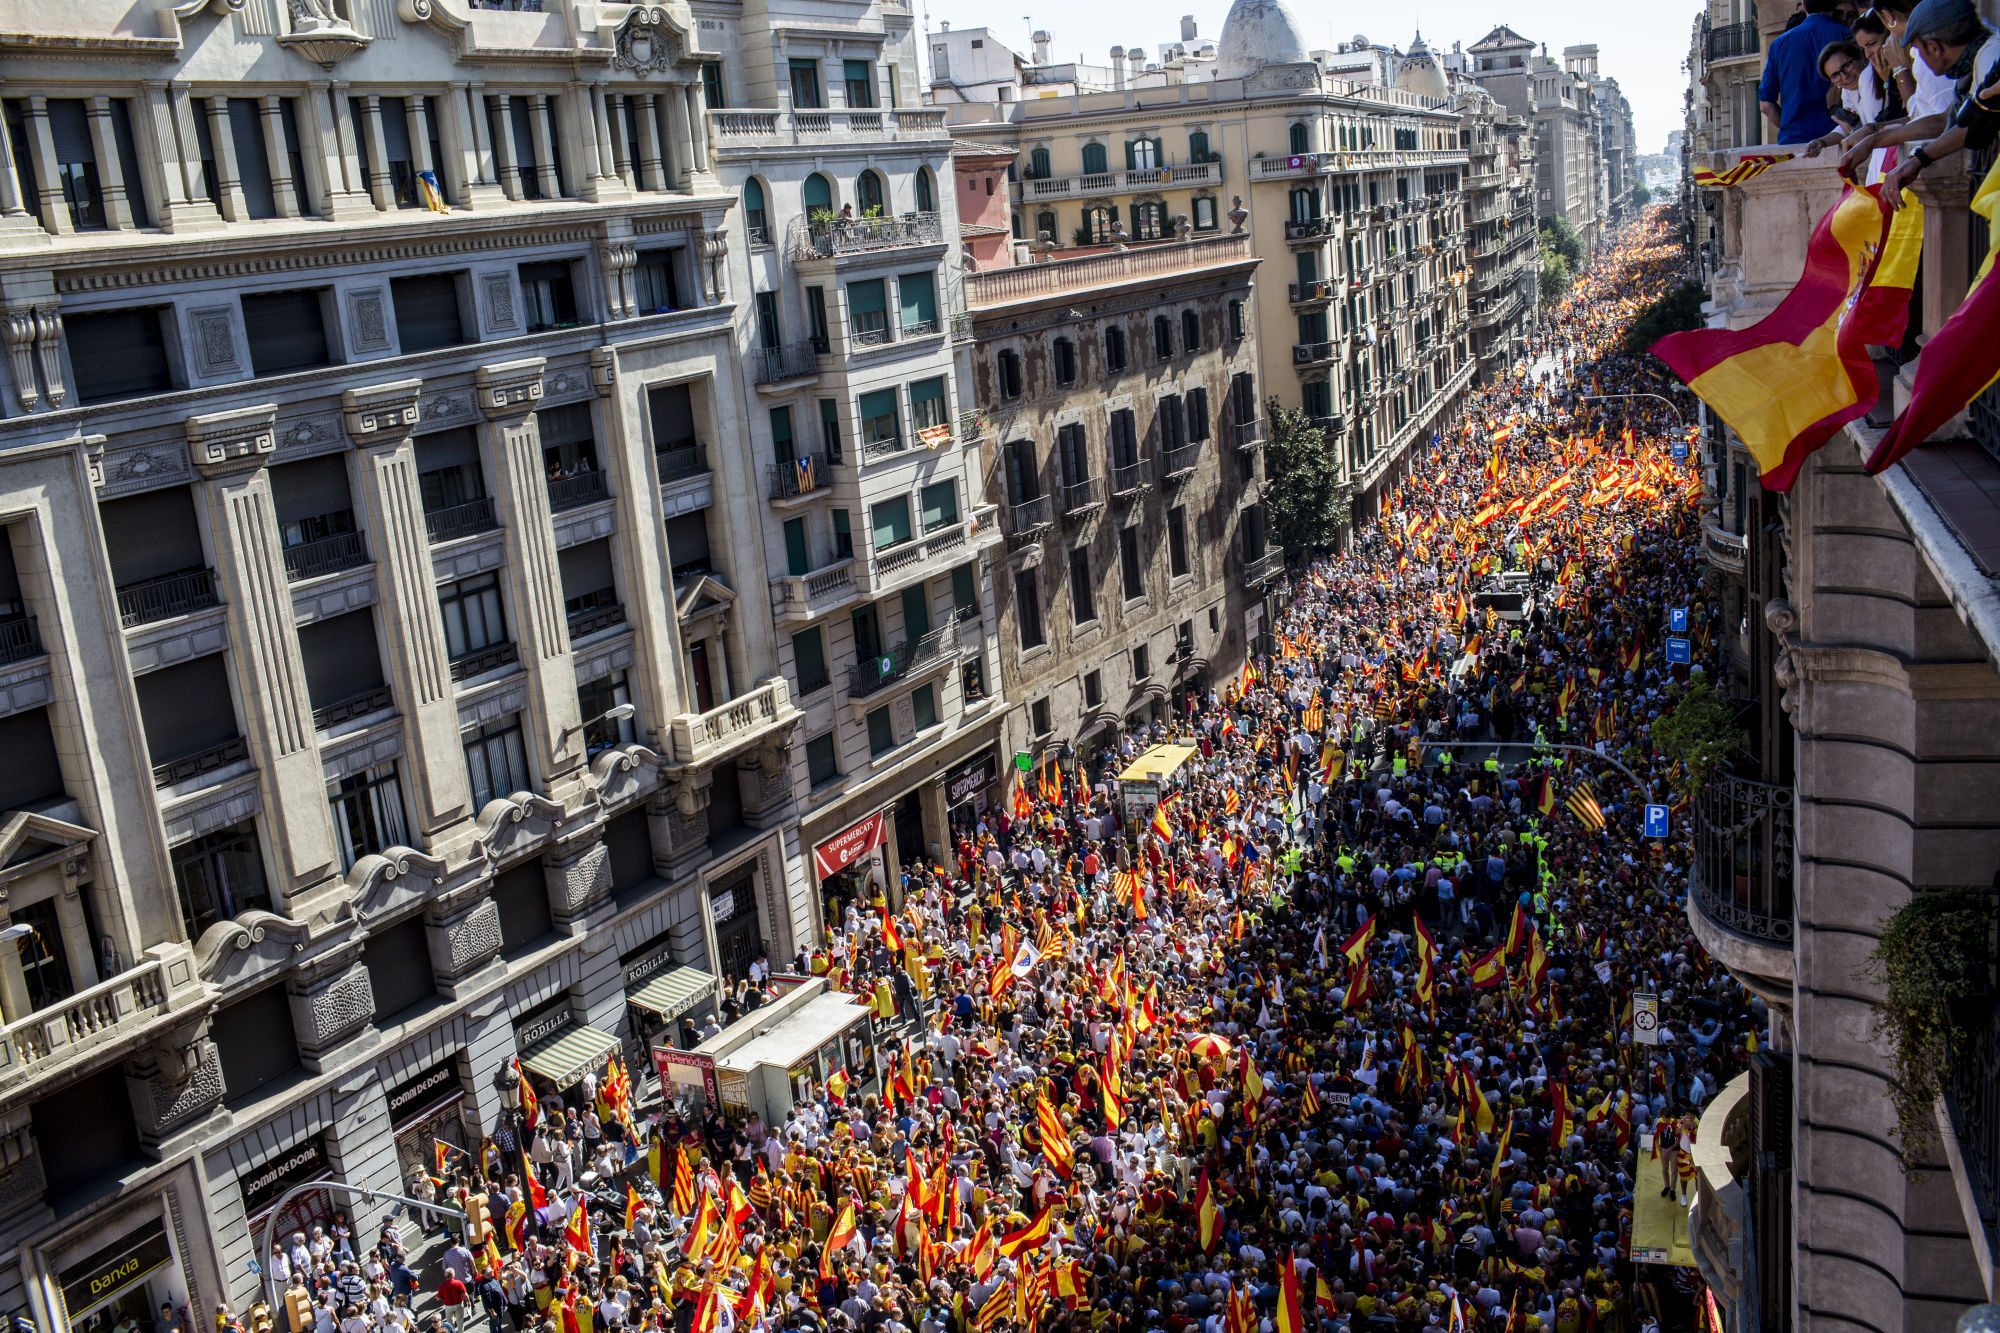 Catalan business executives stepped up their push to defuse a separatist movement as thousands gathered in Barcelona on Sunday to demand the region stay in Spain.